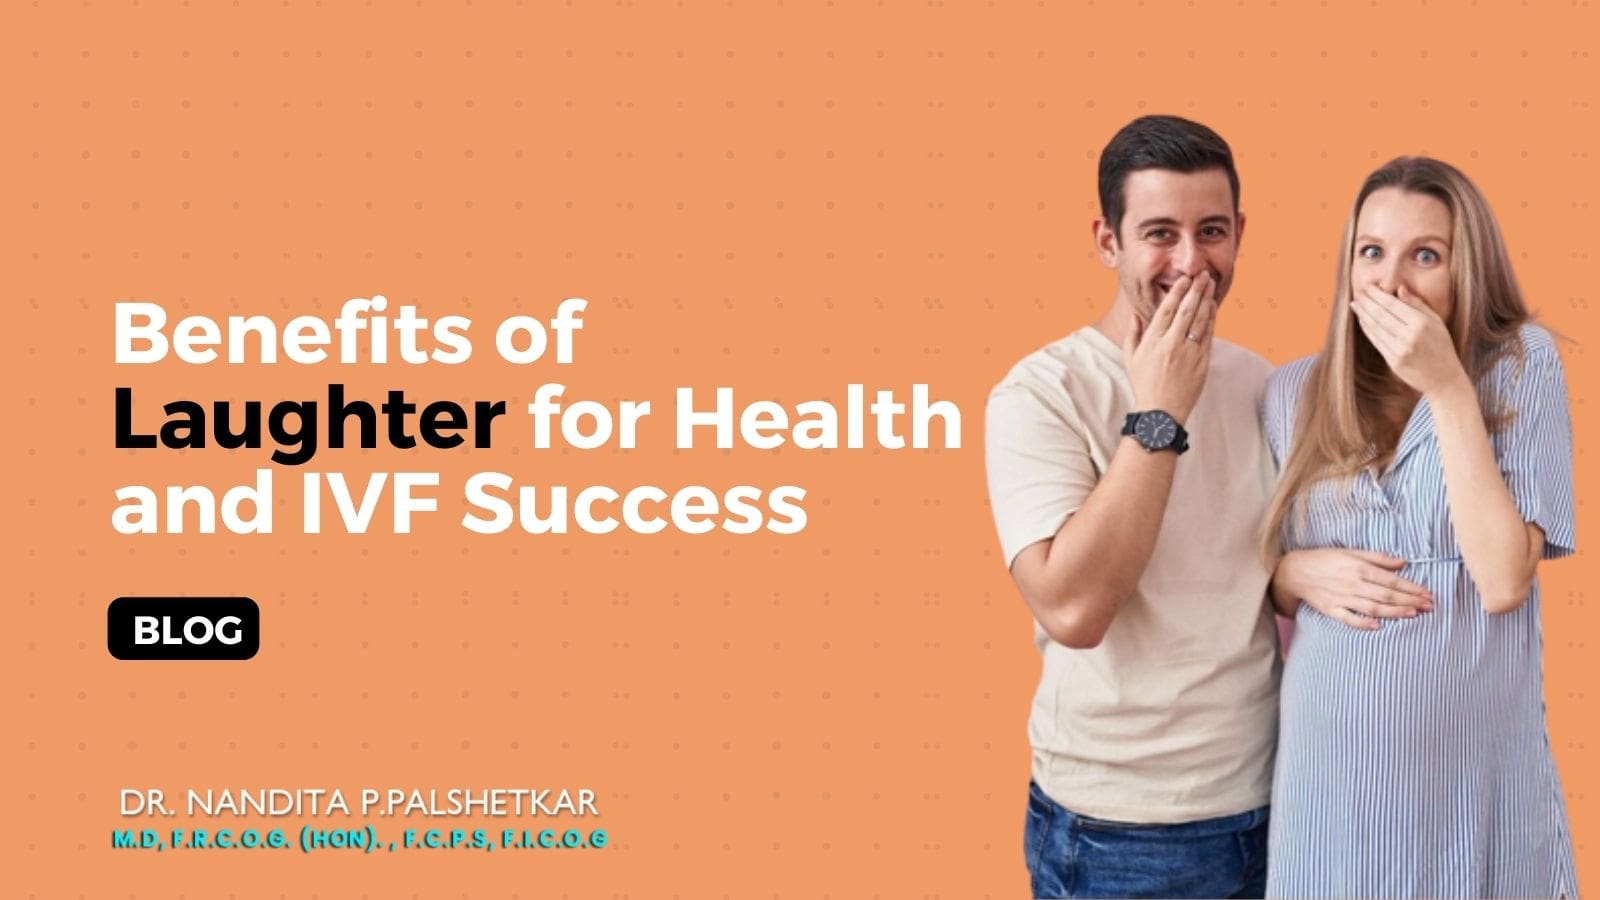 Improve your IVF success with laughter